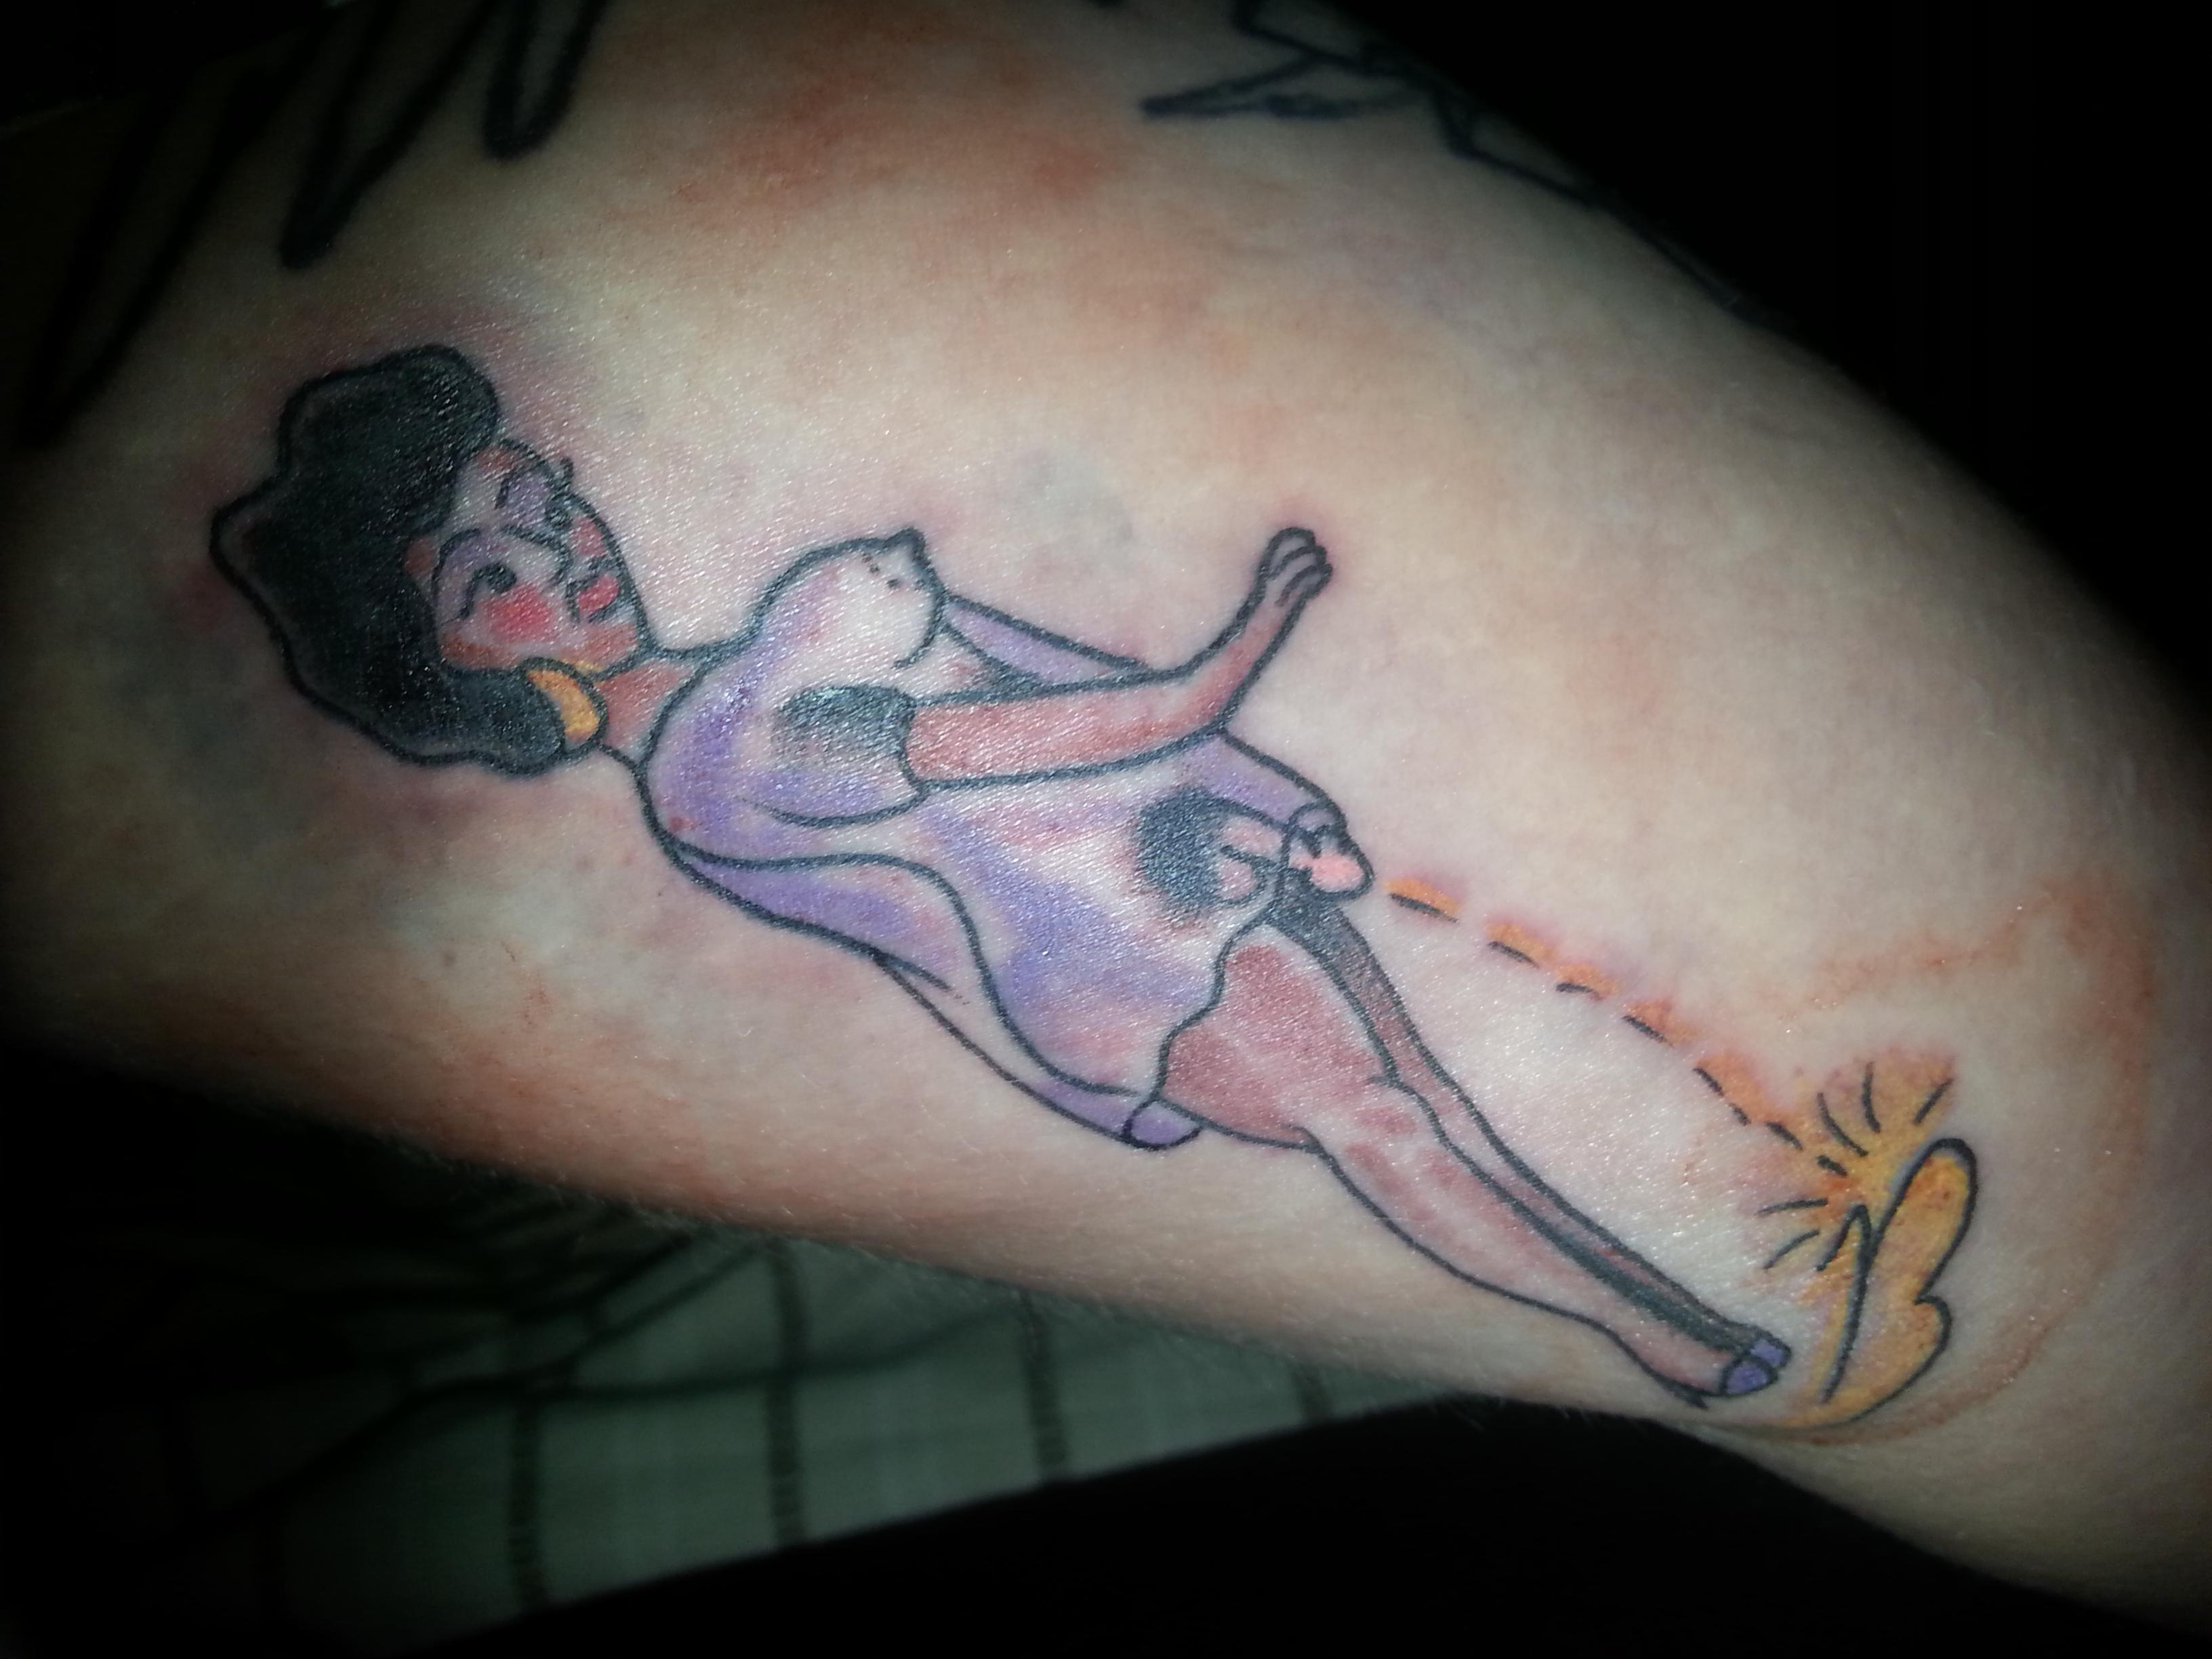 33 People With Ridiculously Bad Tattoos